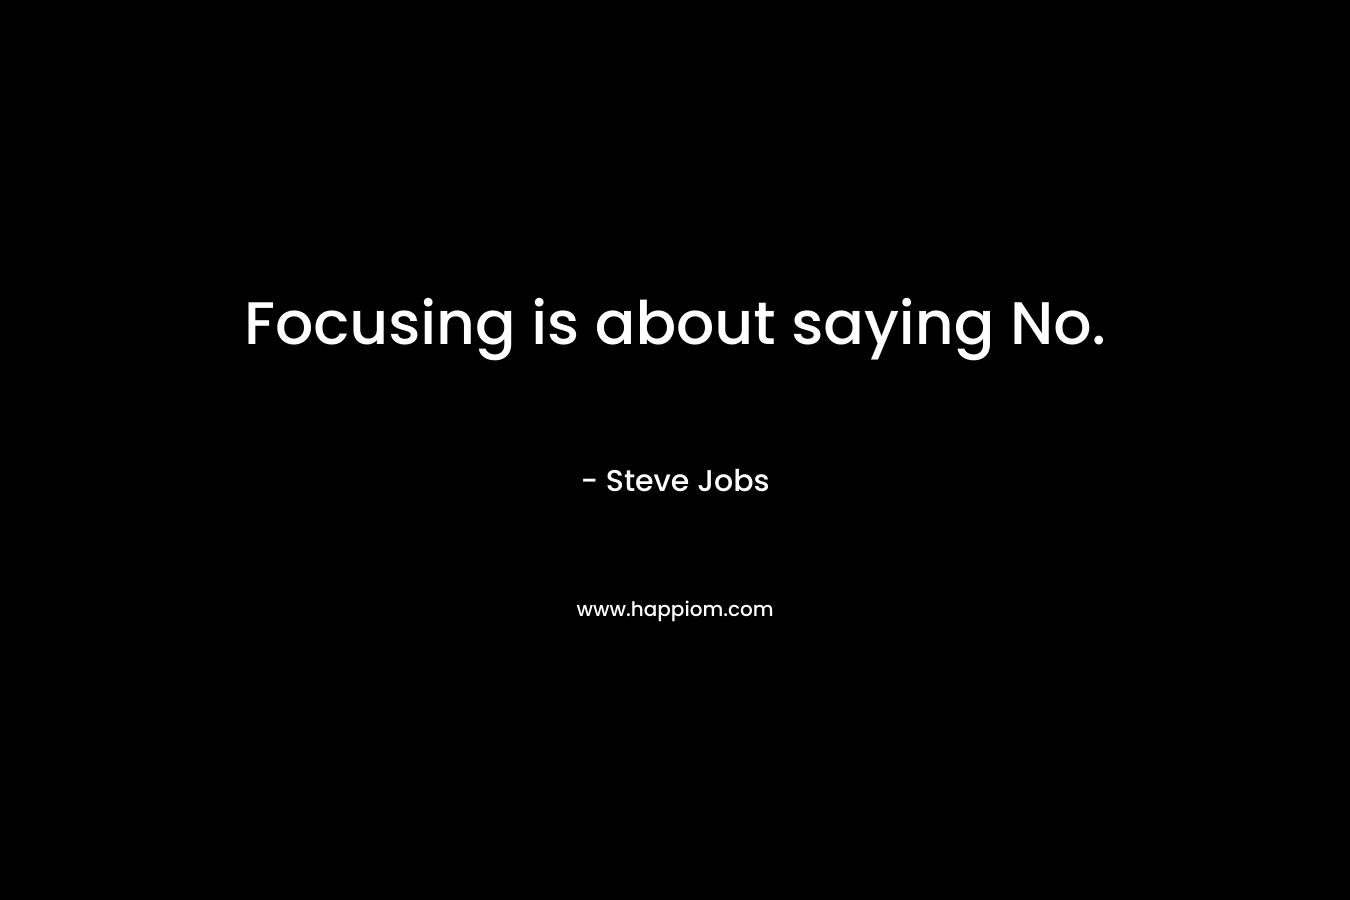 Focusing is about saying No.